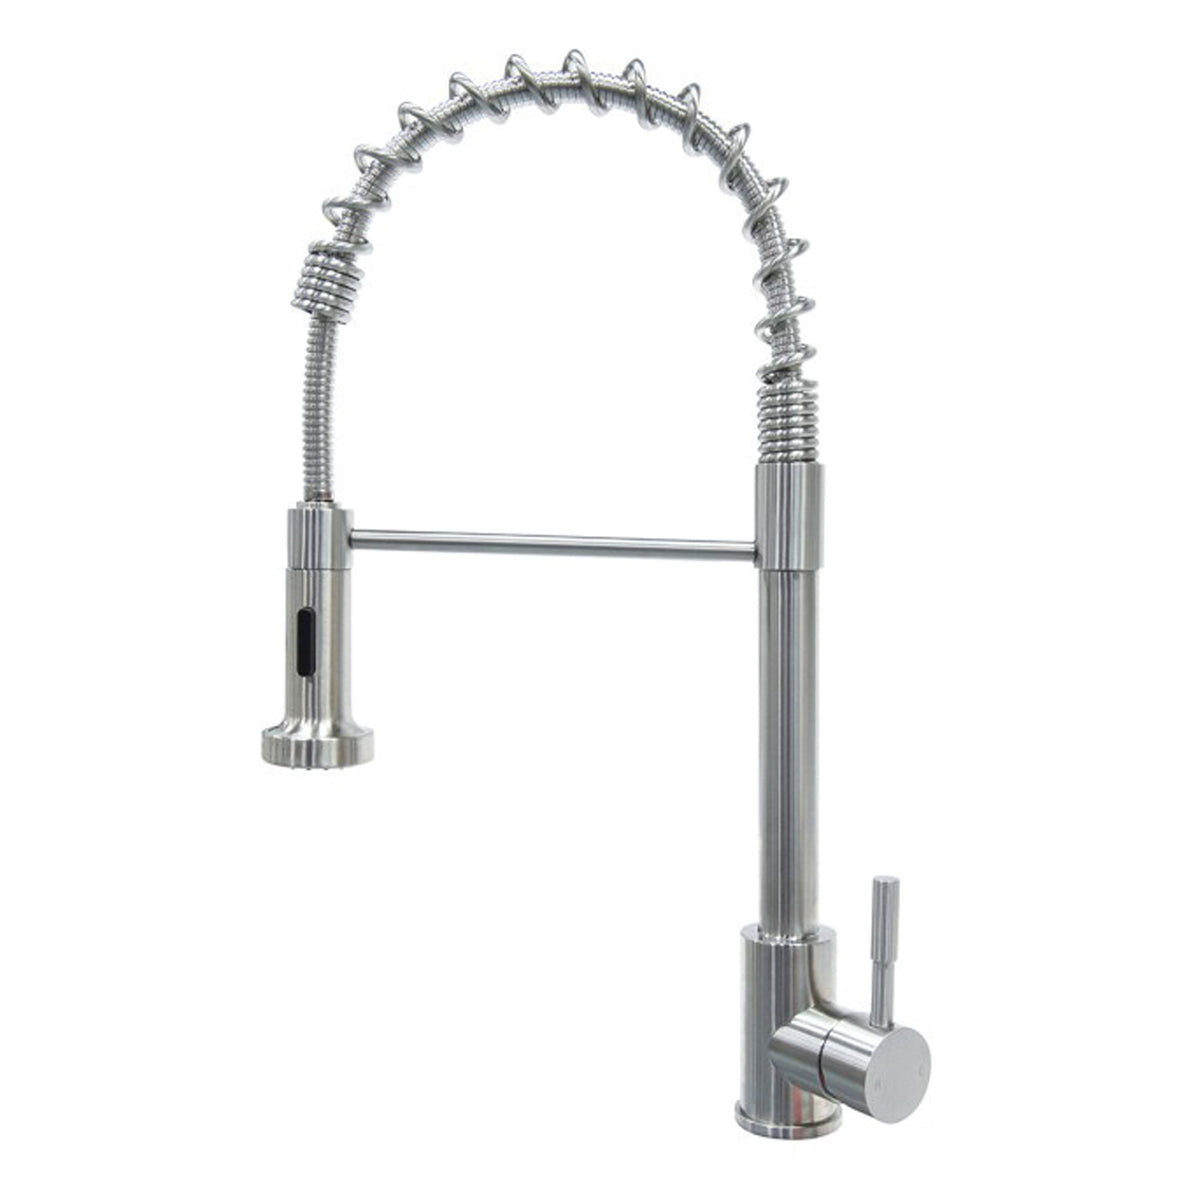 Lippert 719323 Stainless Steel Coiled Pull-Down Faucet